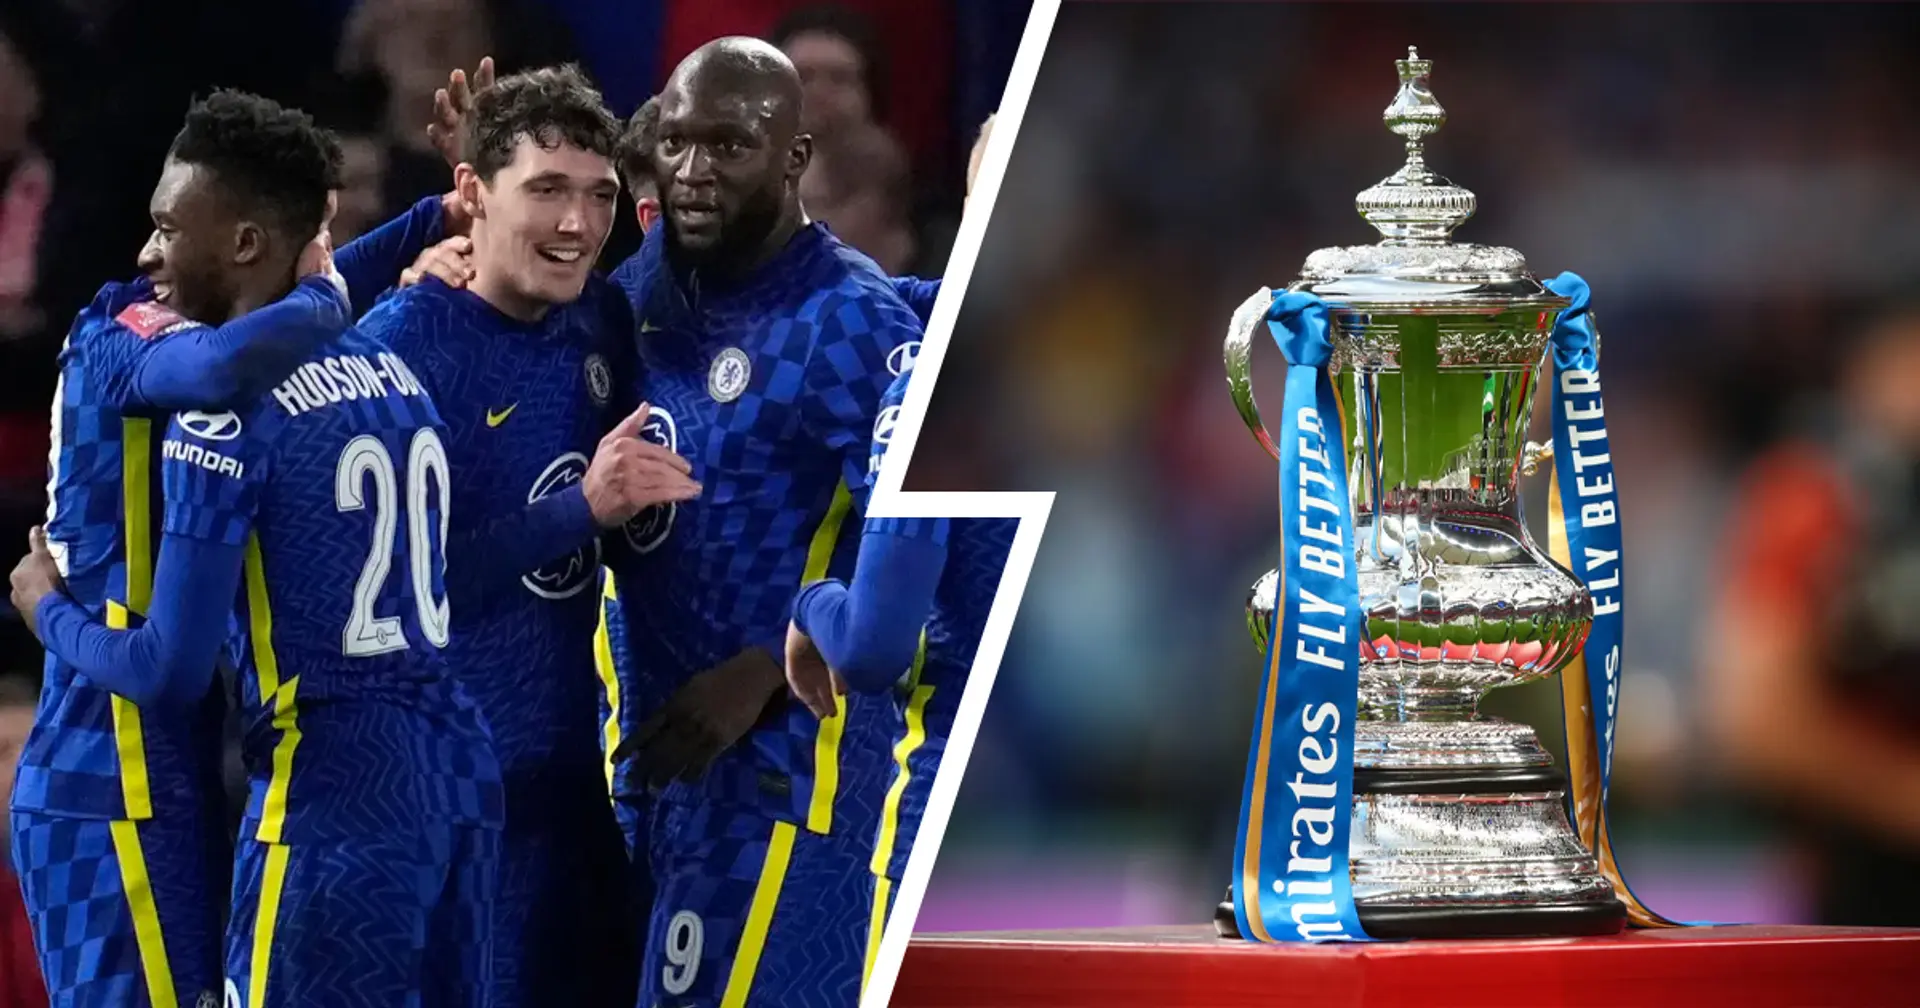 OFFICIAL: Chelsea face Plymouth Argyle in FA Cup 4th round